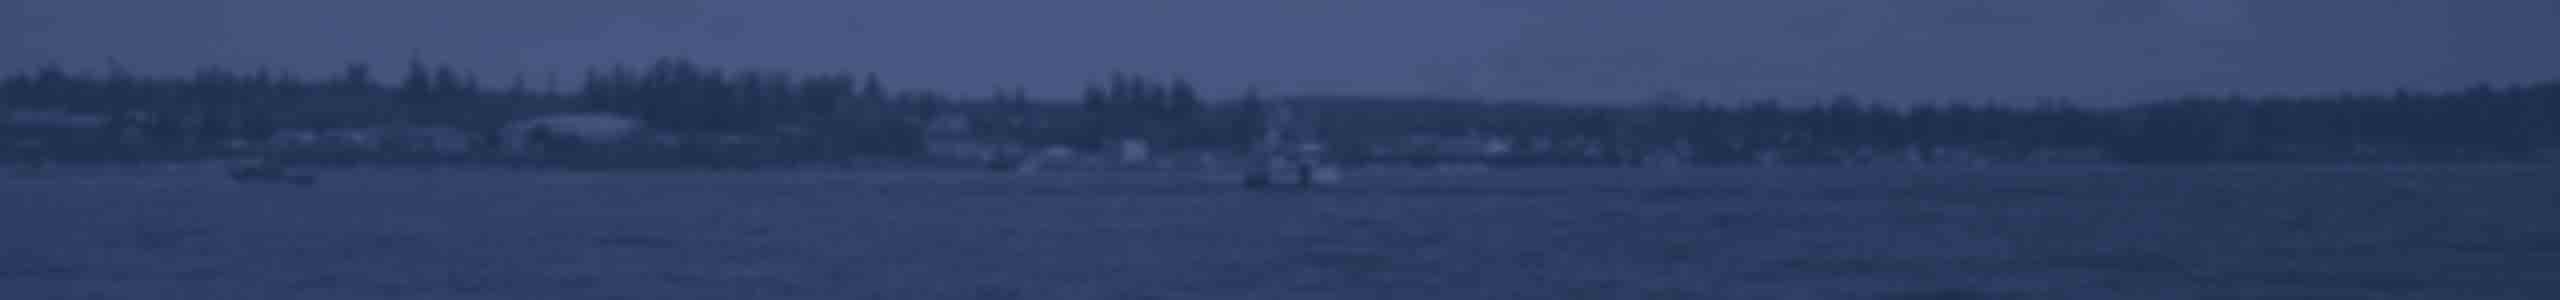 Tulalip Tribal Police Department Fish & Wildlife boat patrolling waters background header image.